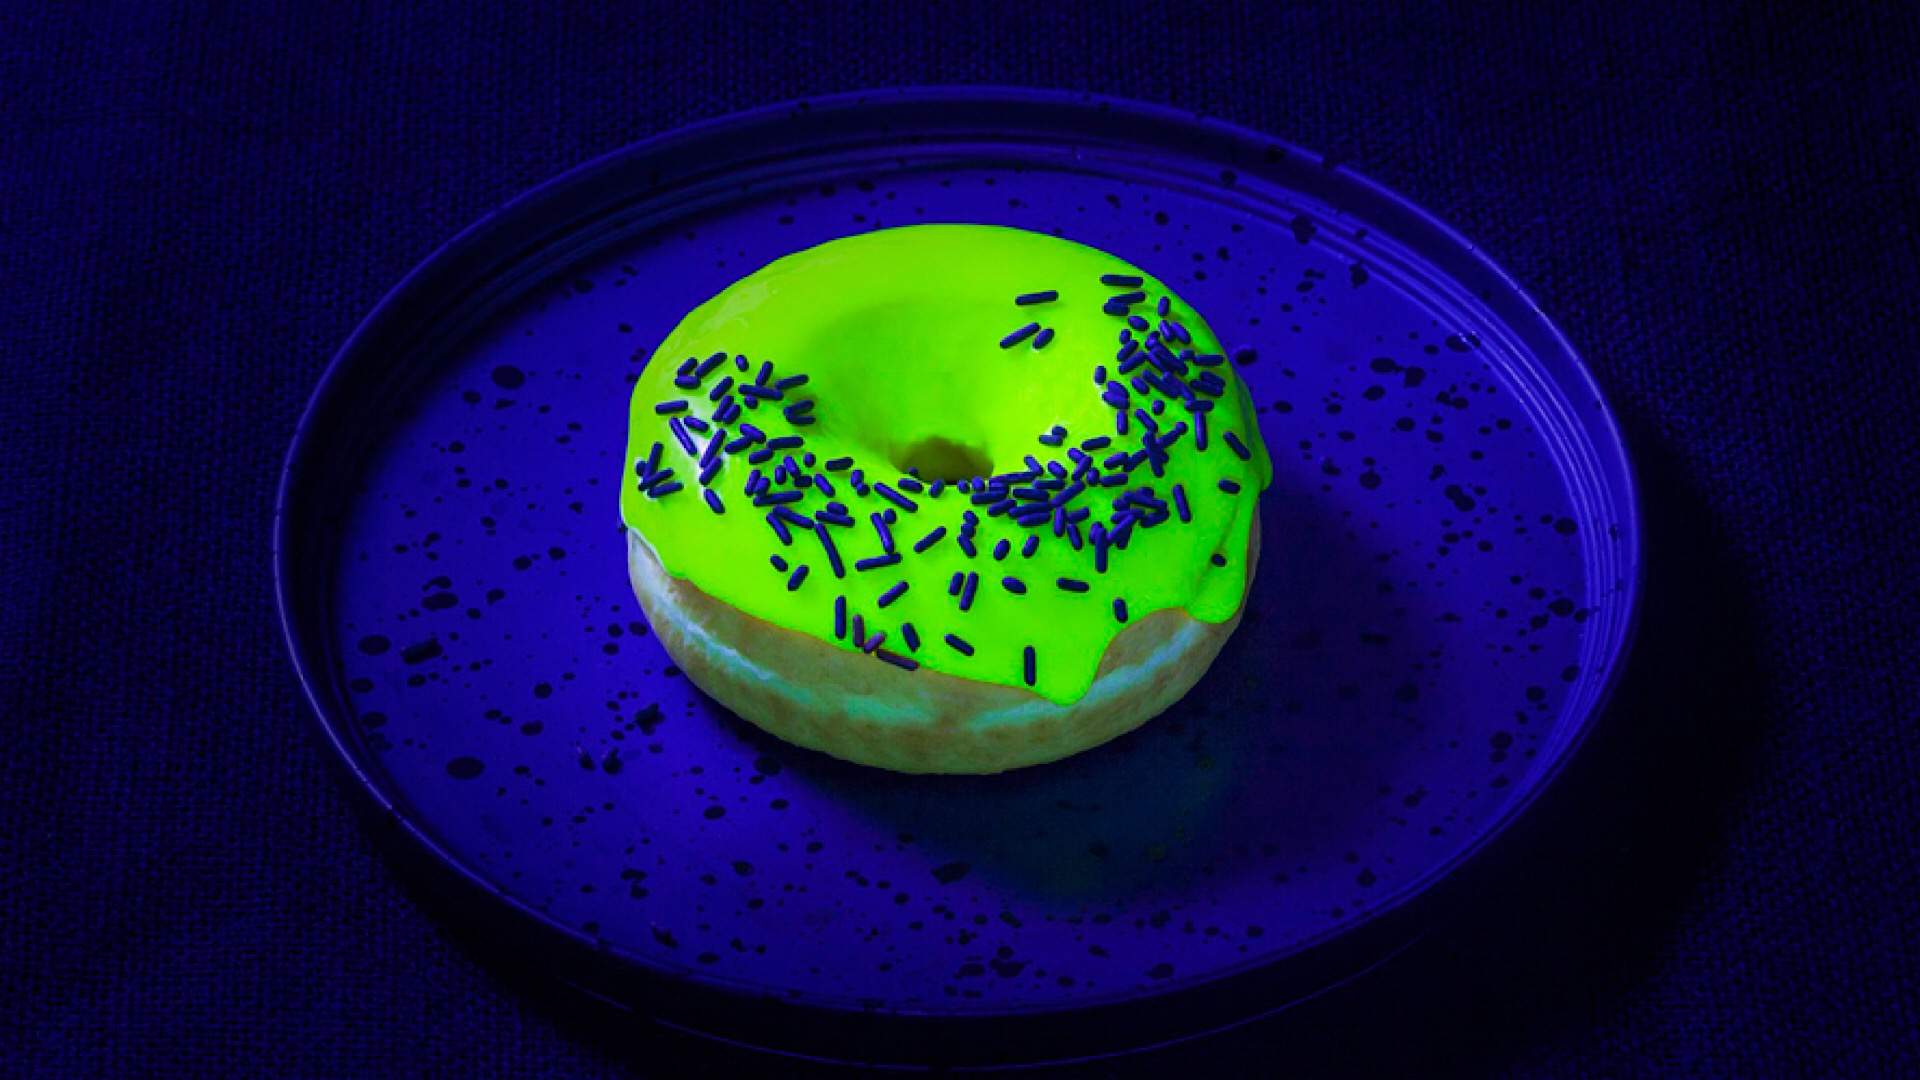 A Glow-in-the-Dark Dessert Cave Has Popped Up in Martin Place